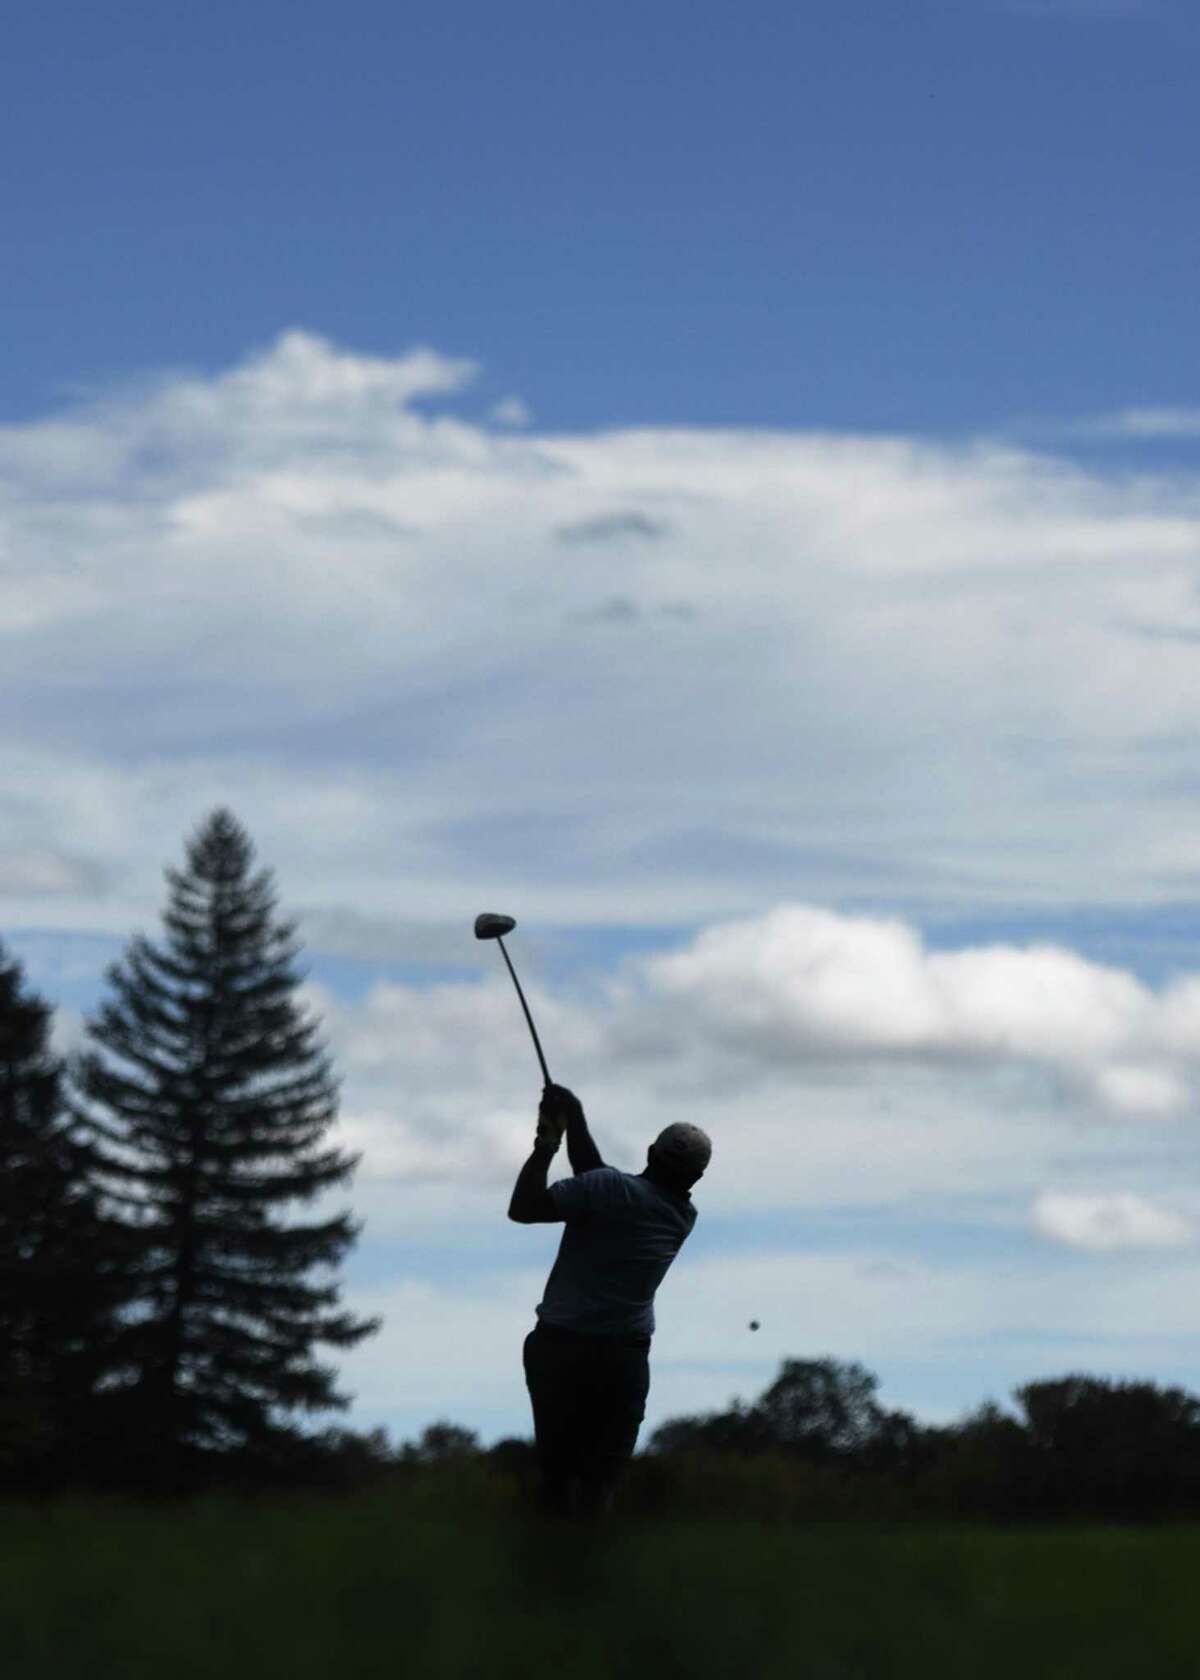 Former New York Jets running back Bruce Harper tees off at the 27th annual Tim Teufel Celebrity Golf Tournament at Tamarack Country Club in Greenwich, Conn. Tuesday, Oct. 10, 2017. The golf outing, presented by Sweet'N Low, featured more than a dozen former and current sports celebrities competing on the course to raise money for the Fairfield County Sports Commission.